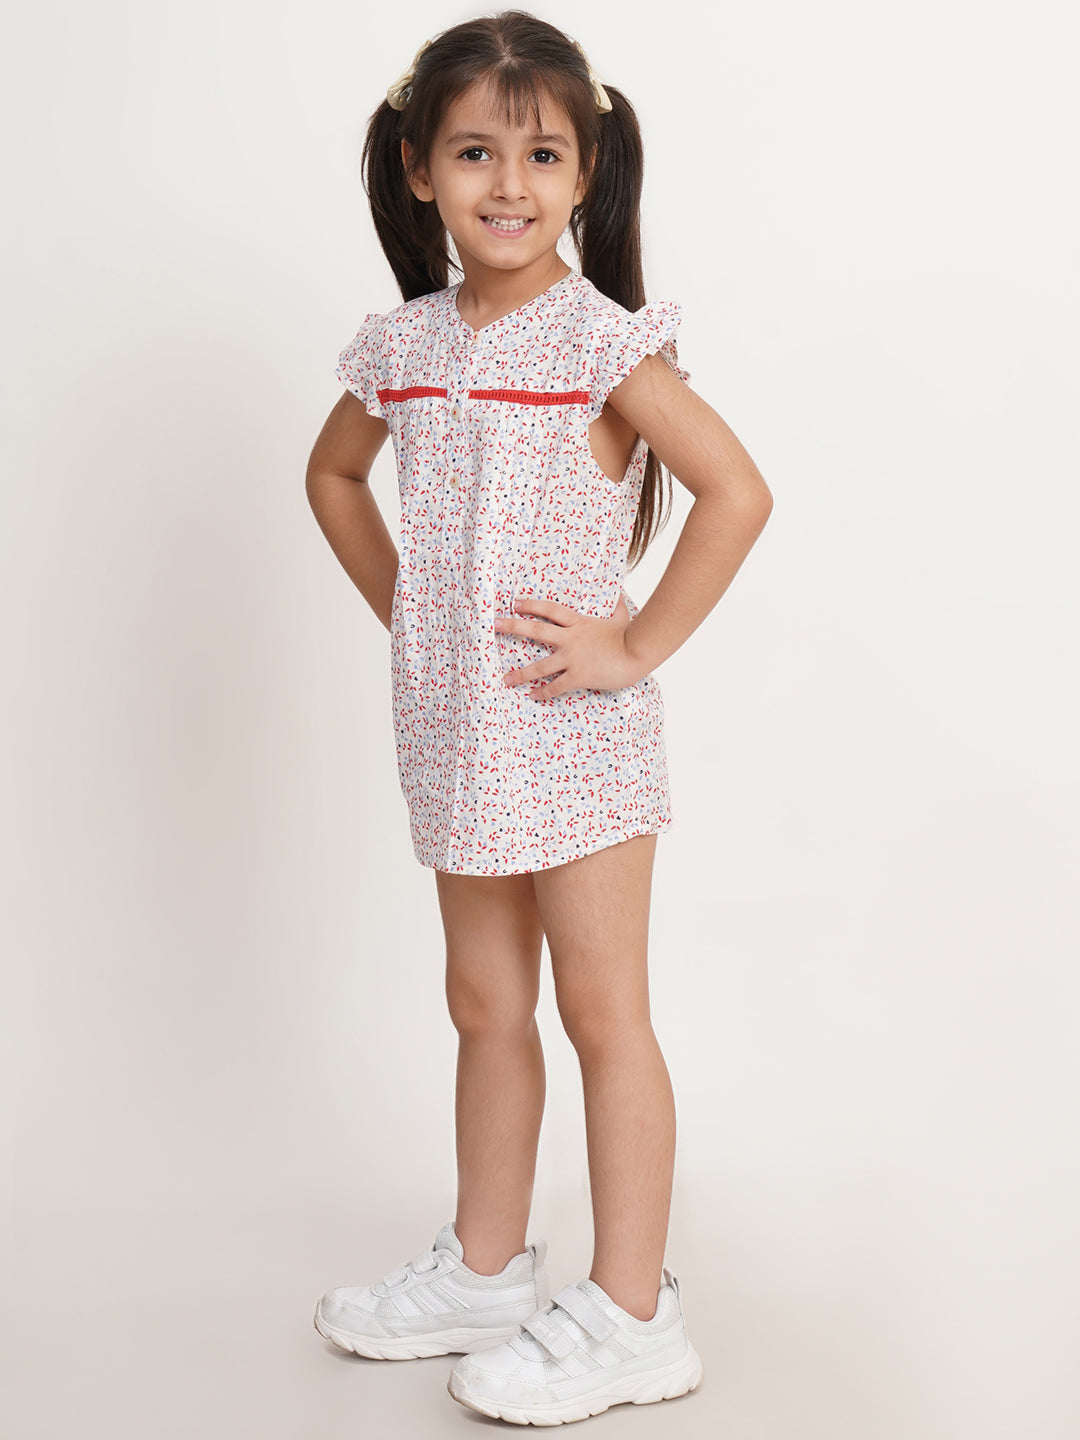 CREATIVE KID'S Girl White & Red Printed Cotton A-Line Dress